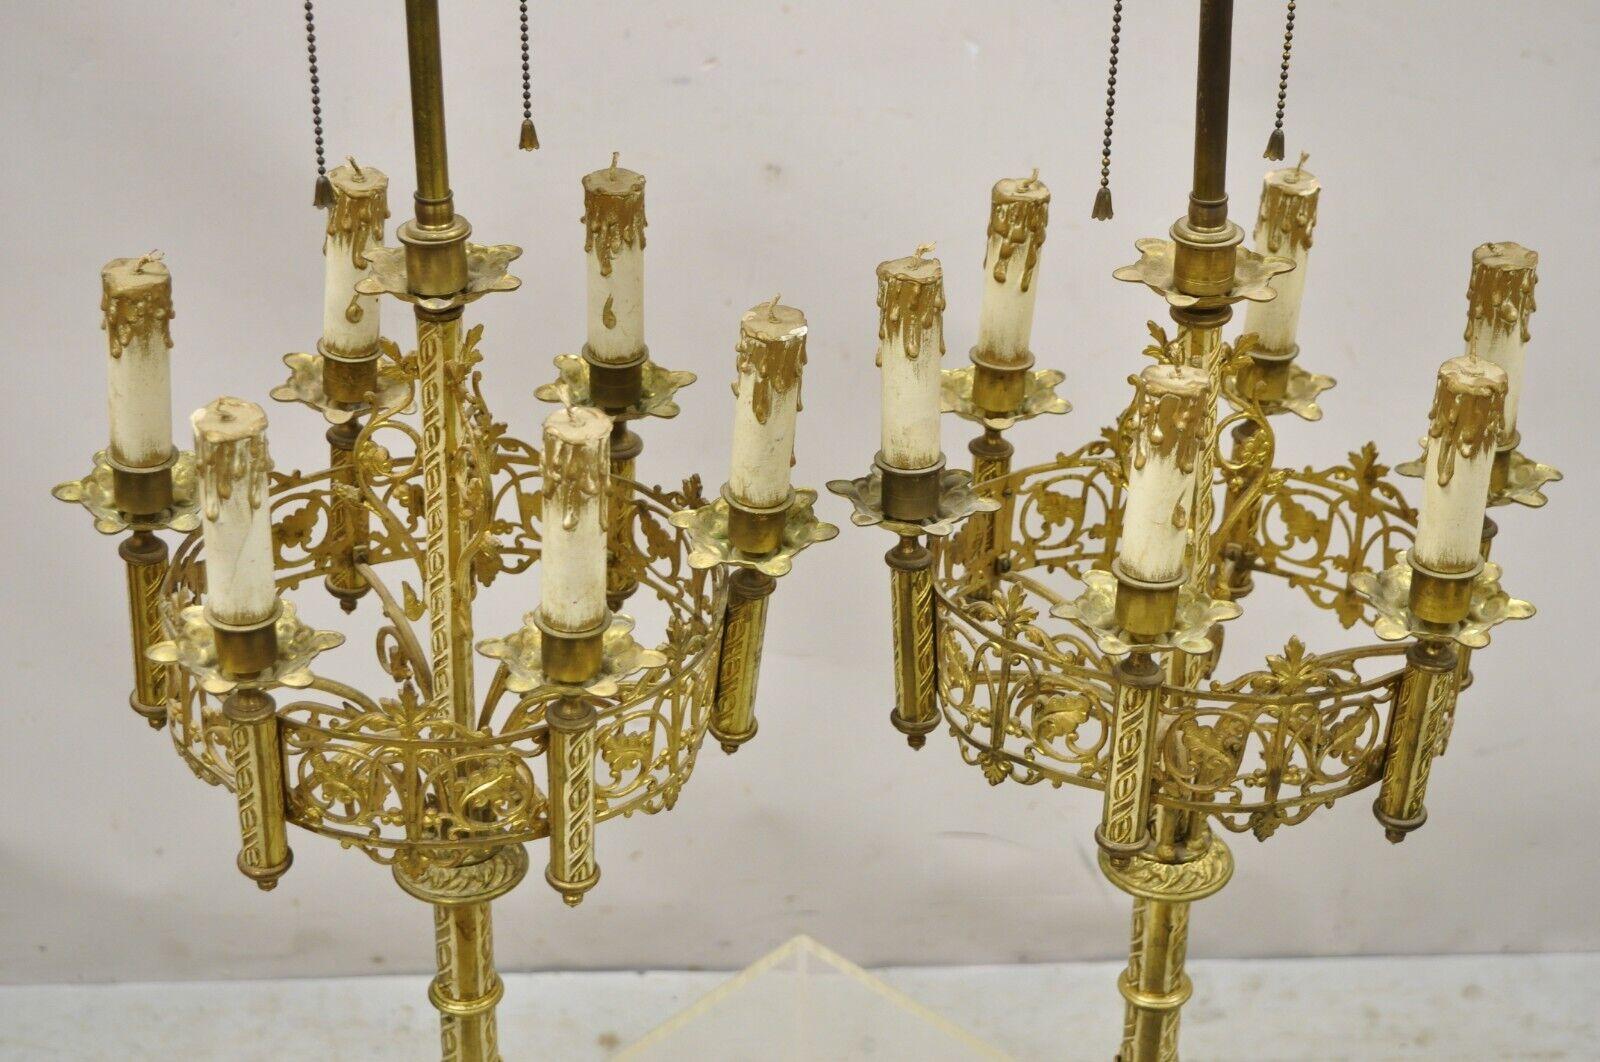 Antique Gothic Revival Gold Bronze Figural Candelabra Table Lamps, a Pair For Sale 5